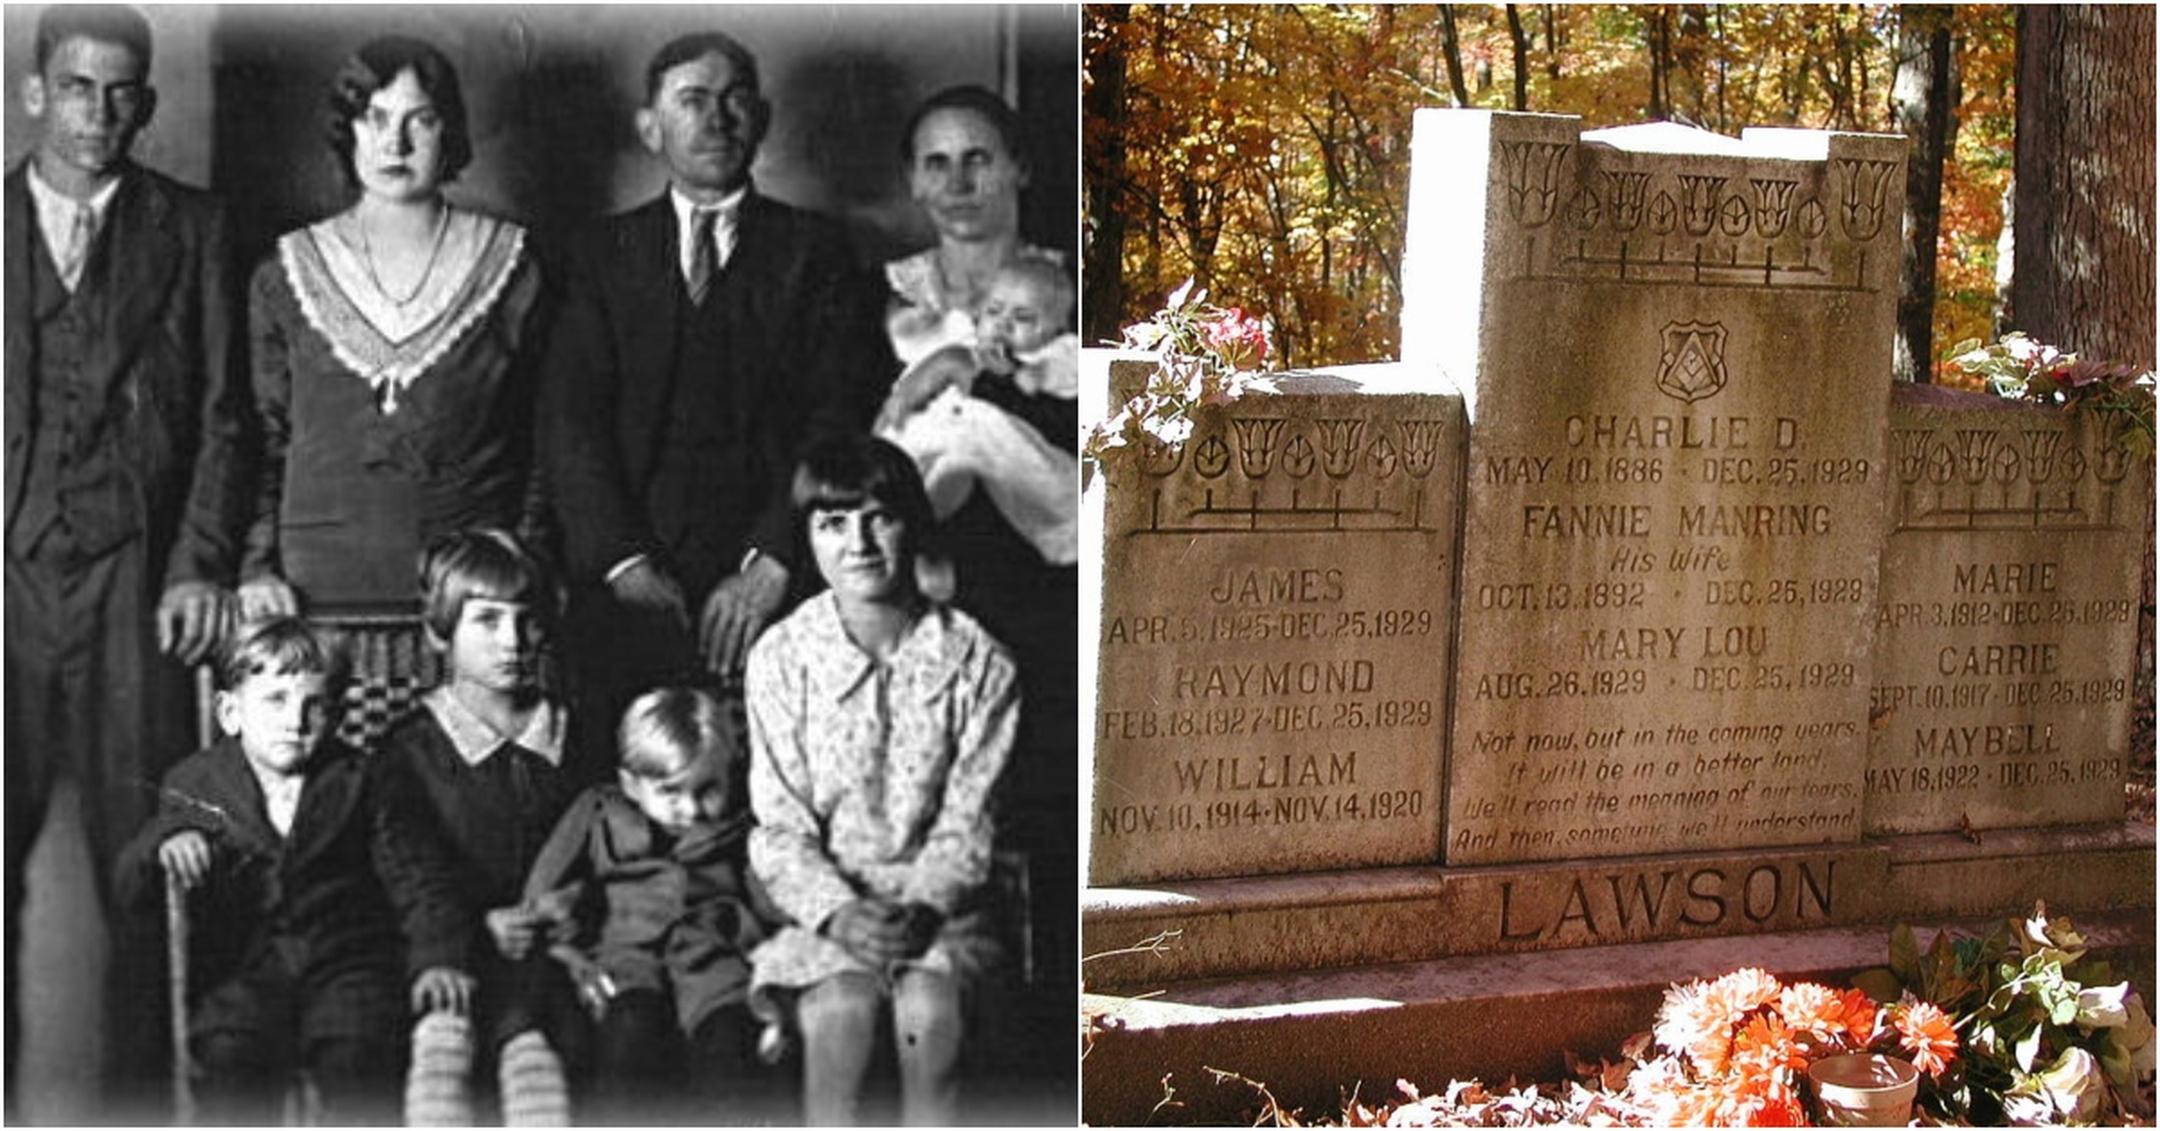 lawson family murders - Charlied. | May 10.1886 Dec. 25,1929 Fannie Manring James His Wife Oct. 13.1892 Dec. 25,1929 Marie Apr.5. Apr 3.1912 Dec. 25.1999 Mary Lou Raymond ane 26. Feb.18.1927 Sept.10.1917 Dec 25.1929 Not now, but in the coming wears Maybol